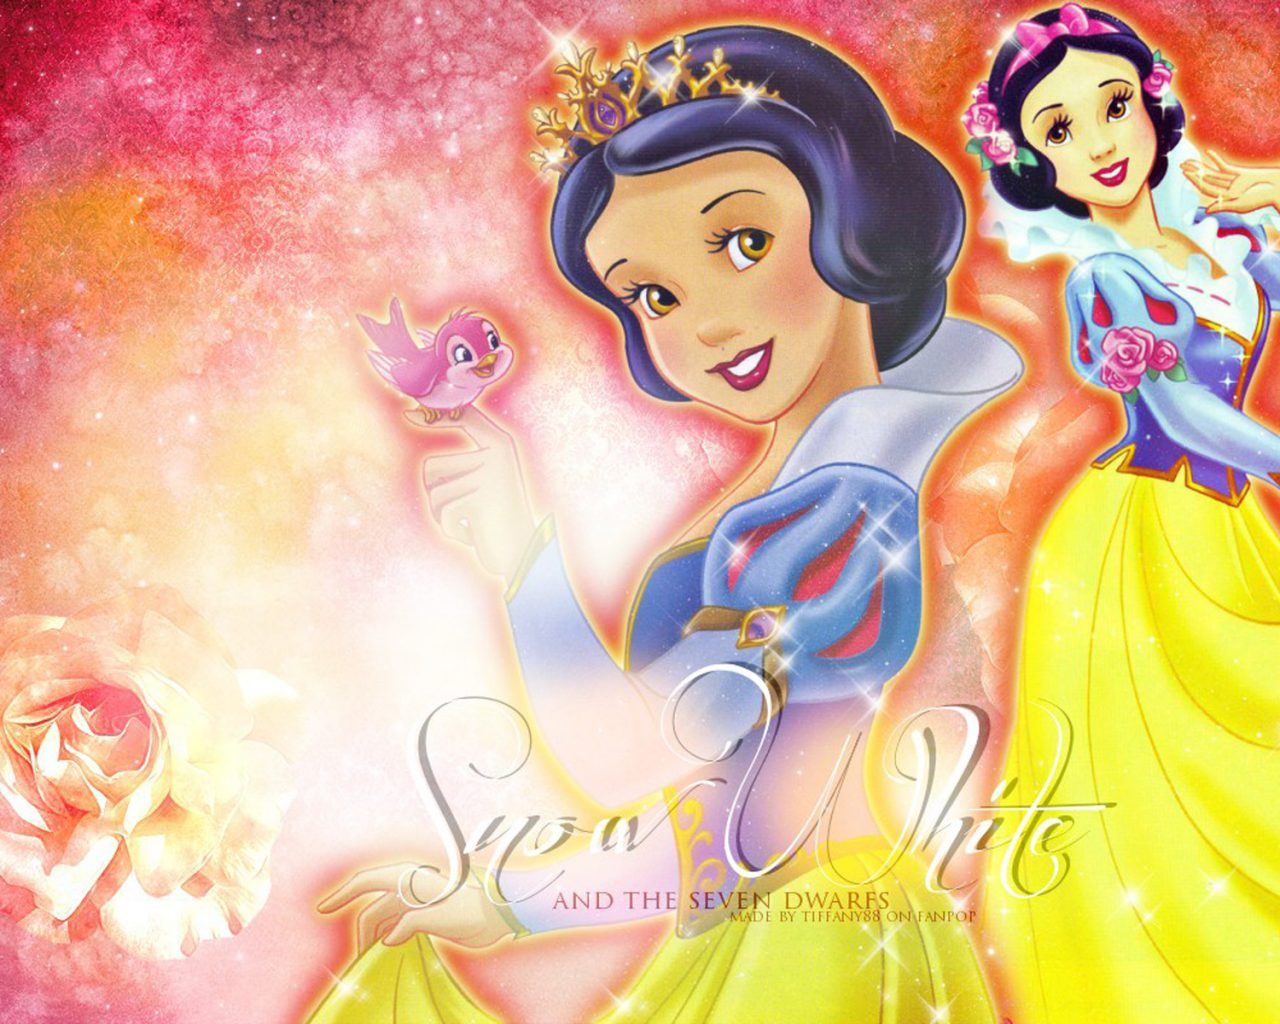 Disney Princess Snow White HD Wallpaper For Mobile Phones Tablet And Lapx1200, Wallpaper13.com